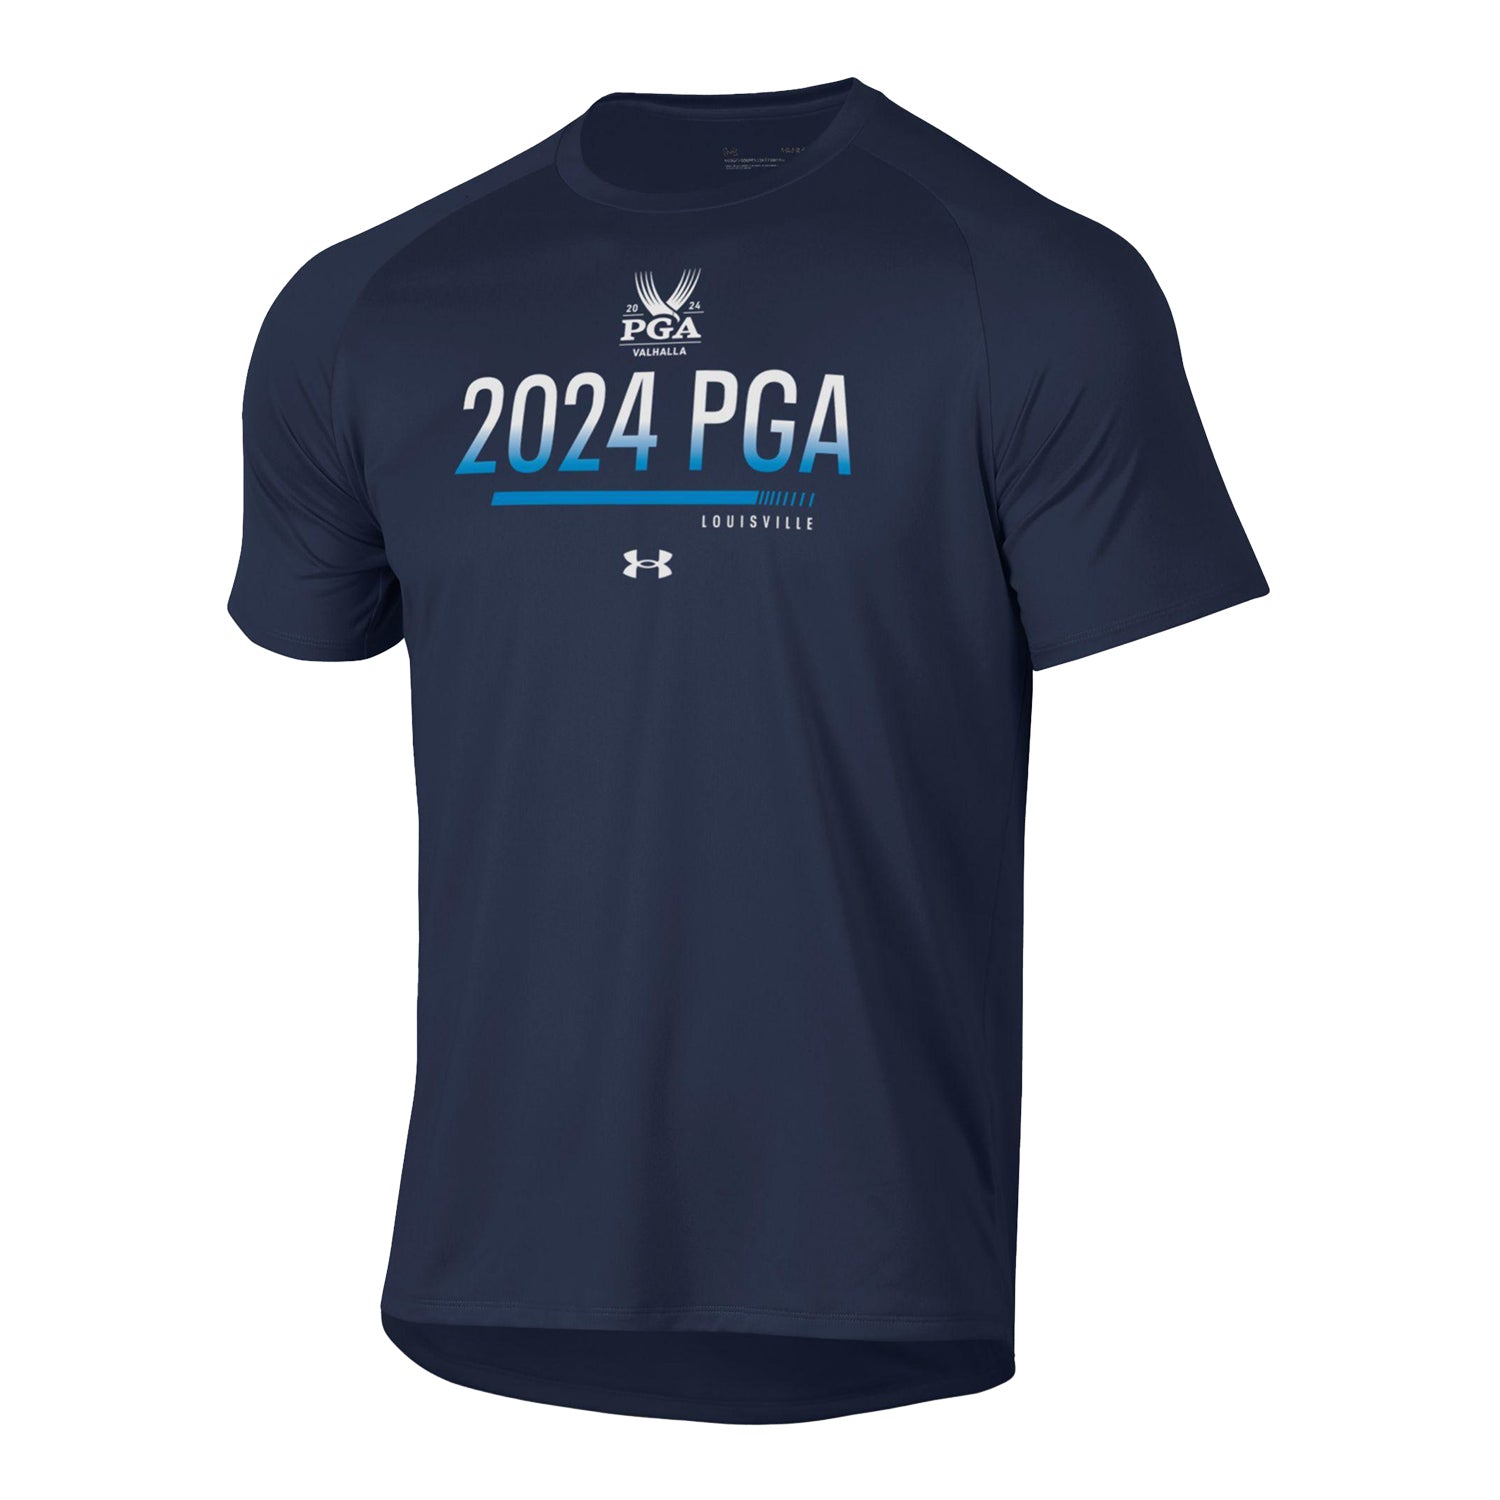 Under Armour 2024 PGA Championship Performance T-Shirt in Navy - Front View